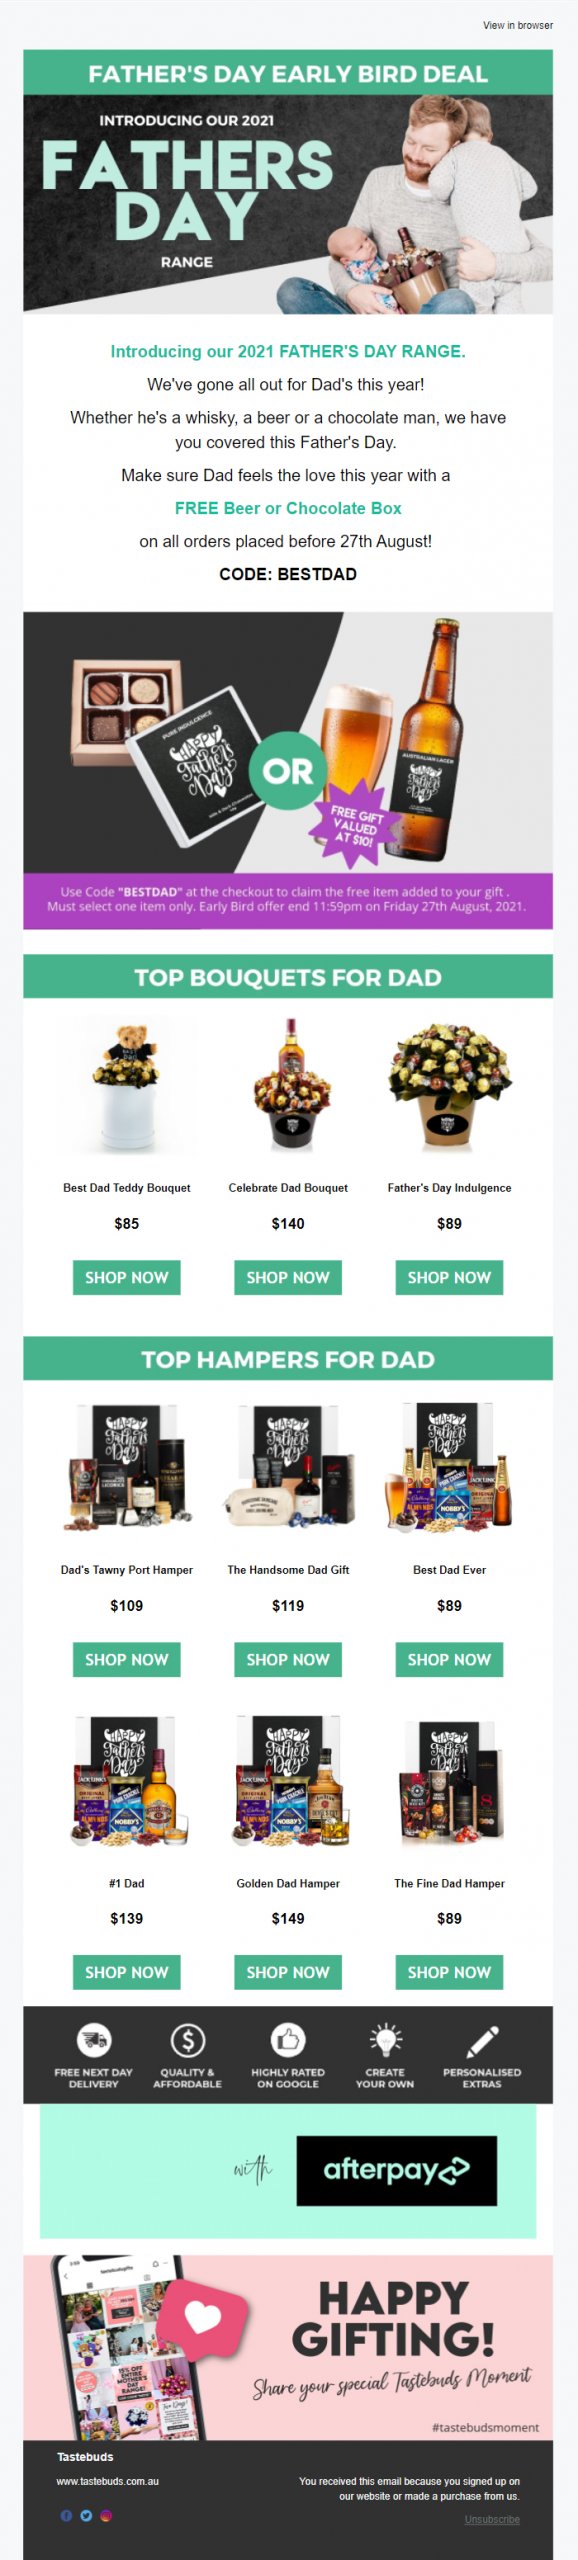 Tastebuds- Father's Day Email Inspiration